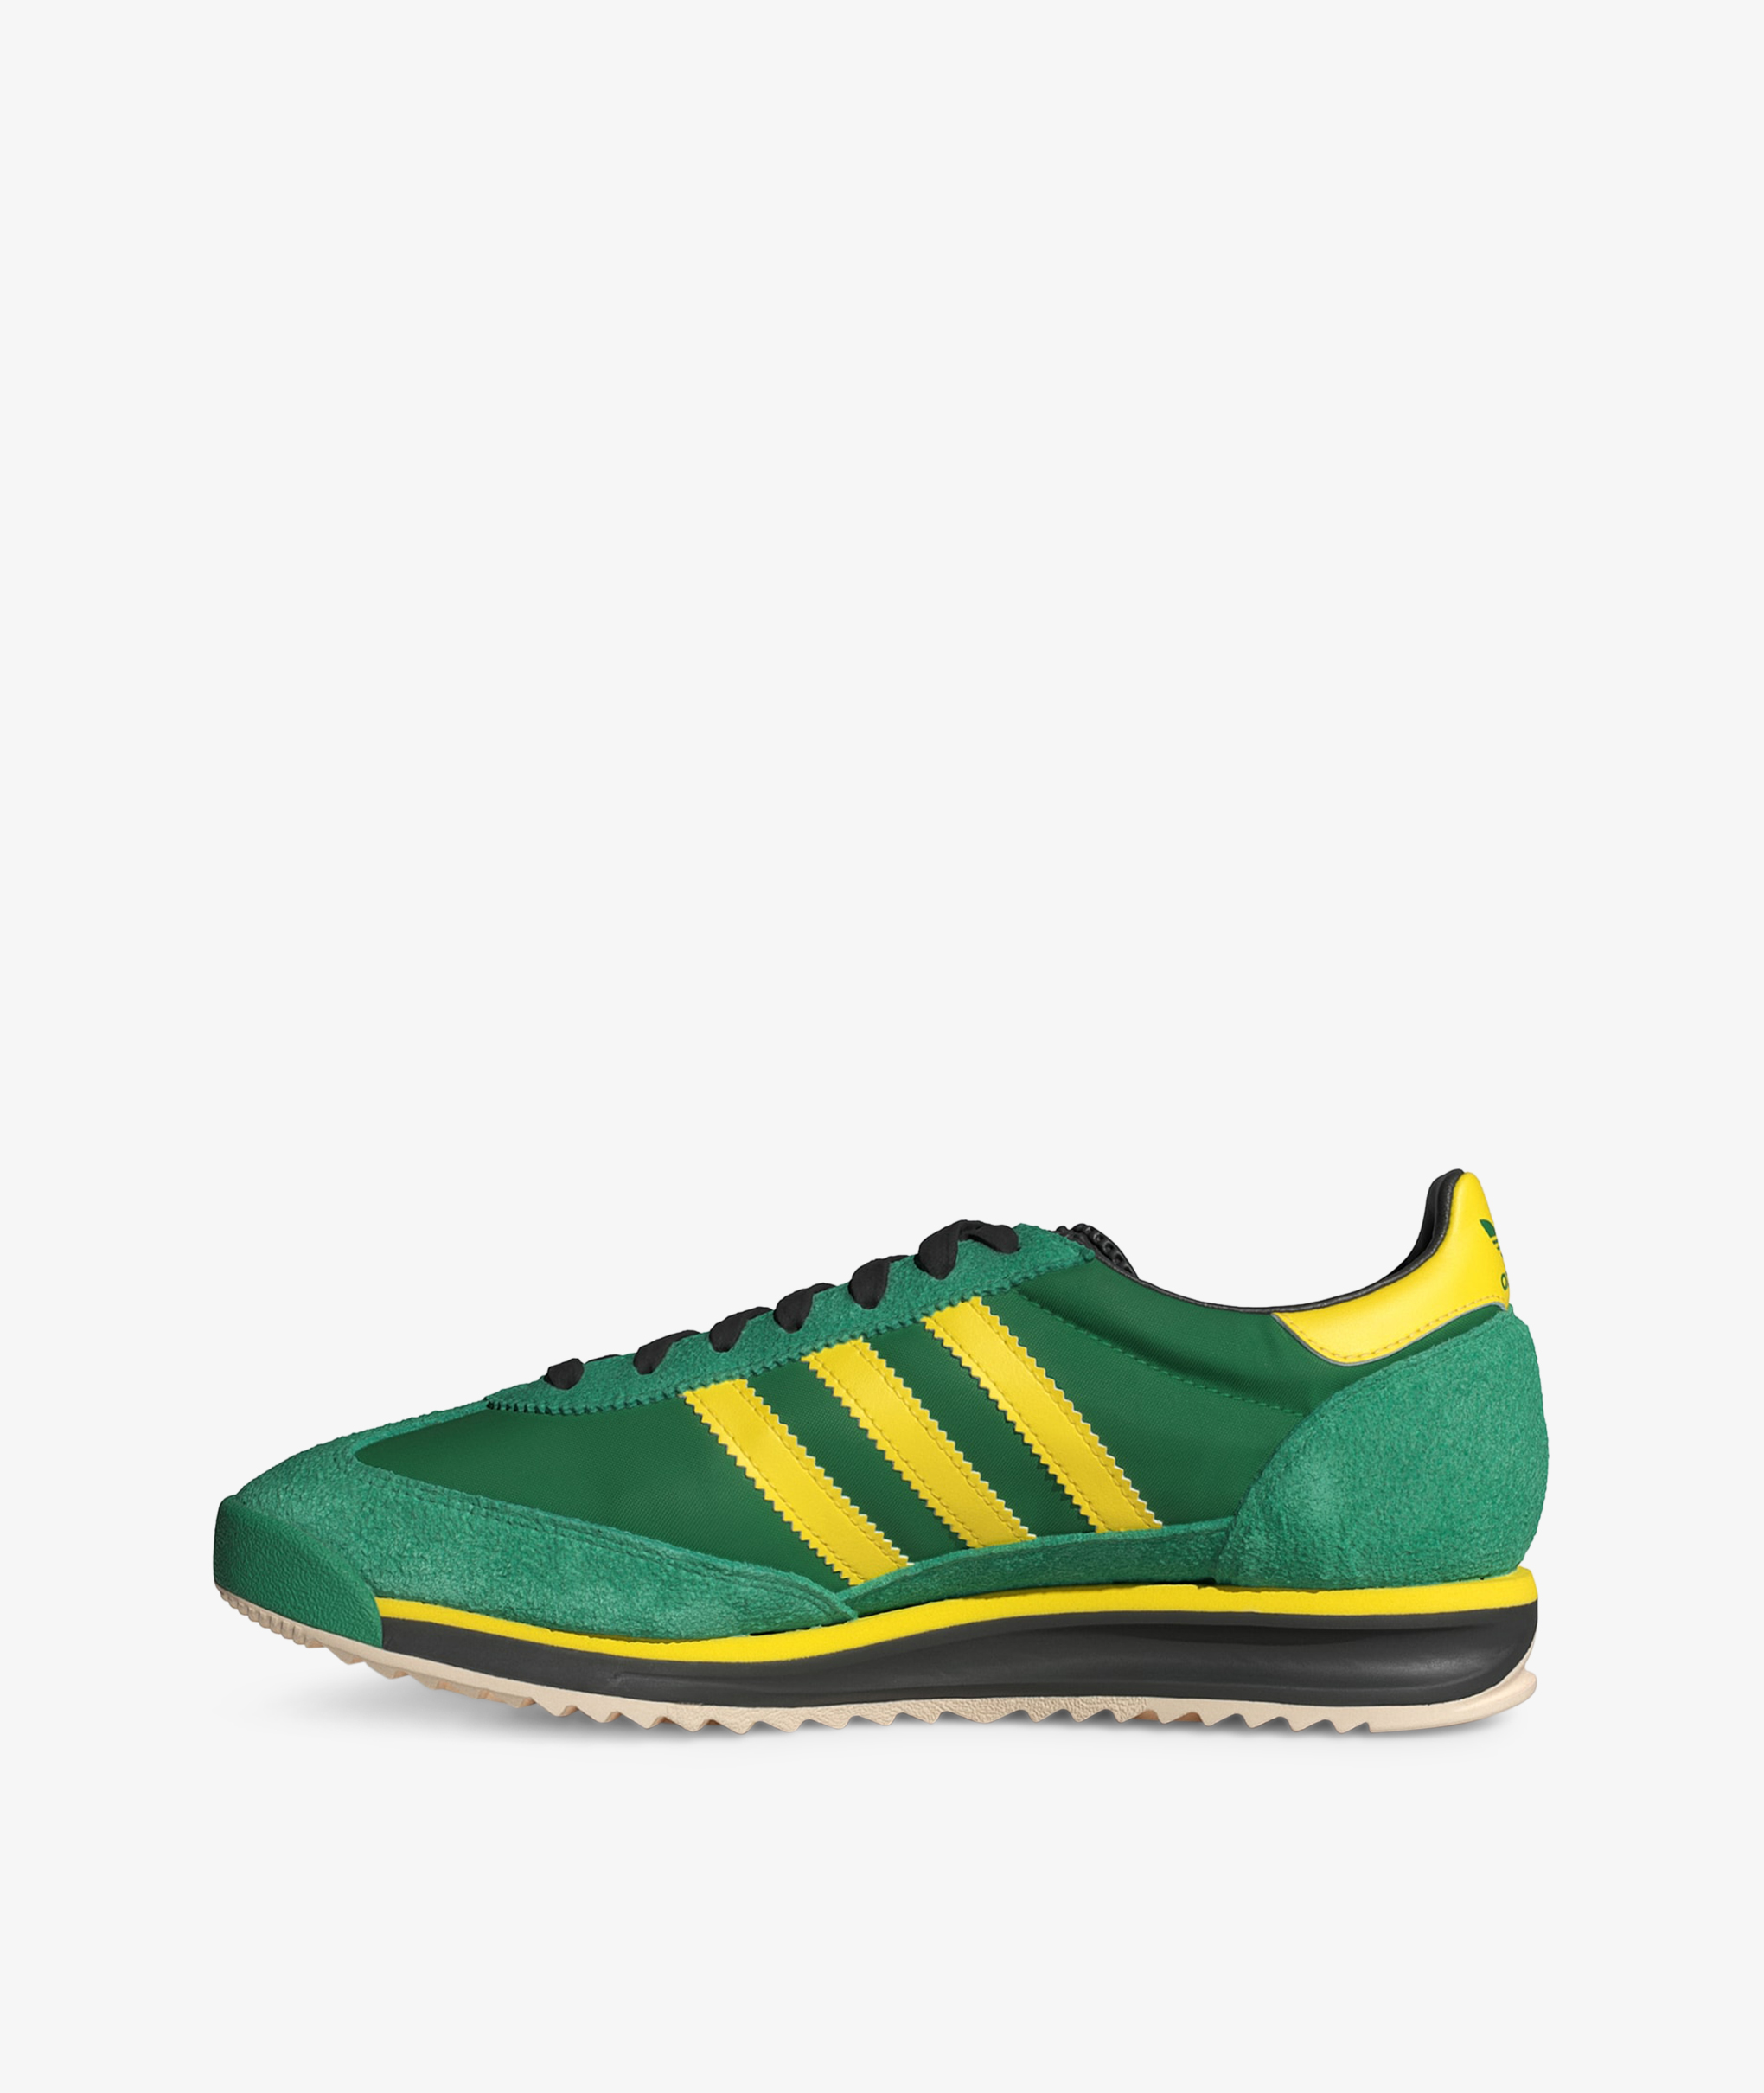 Norse Store | Shipping Worldwide - adidas Originals SL 72 RS - GREEN/YELLOW